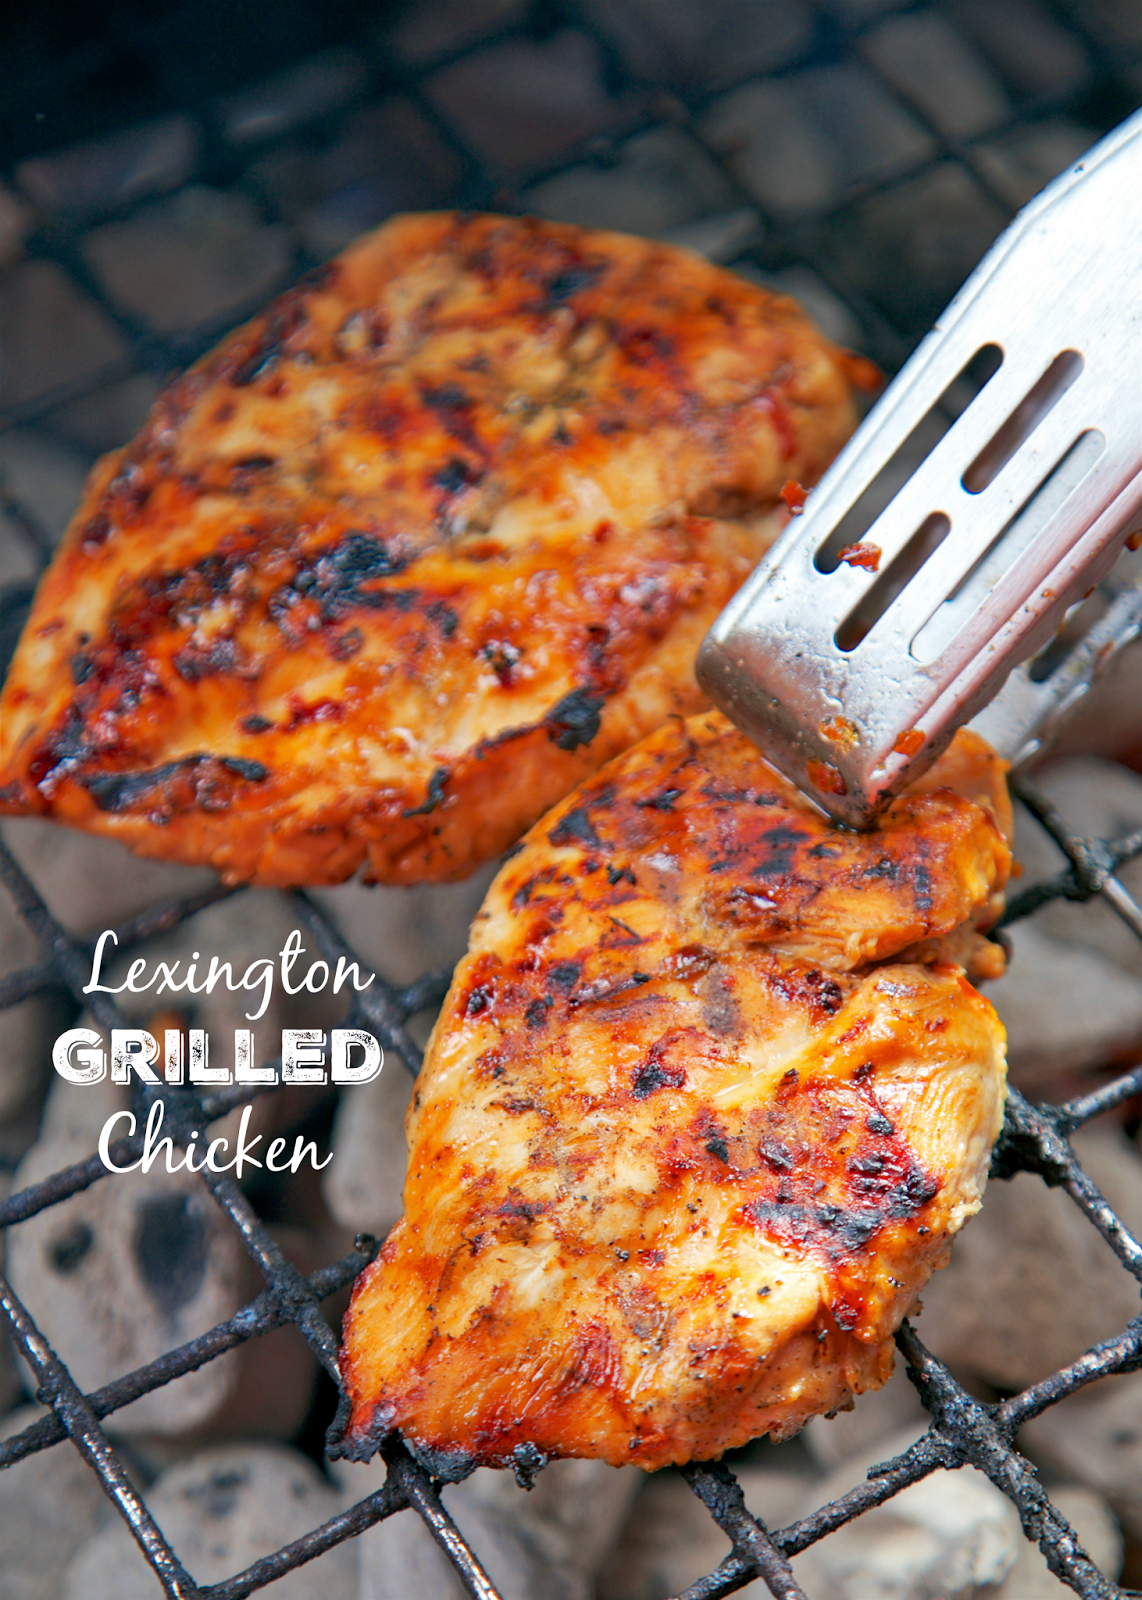 Lexington Grilled Chicken - sweet and tangy grilled chicken! Only 6 ingredients in the marinade - cider vinegar, brown sugar, oil, red pepper flakes, salt and pepper - Perfect for a cookout! Everyone raves about this chicken. There are never any leftovers!!